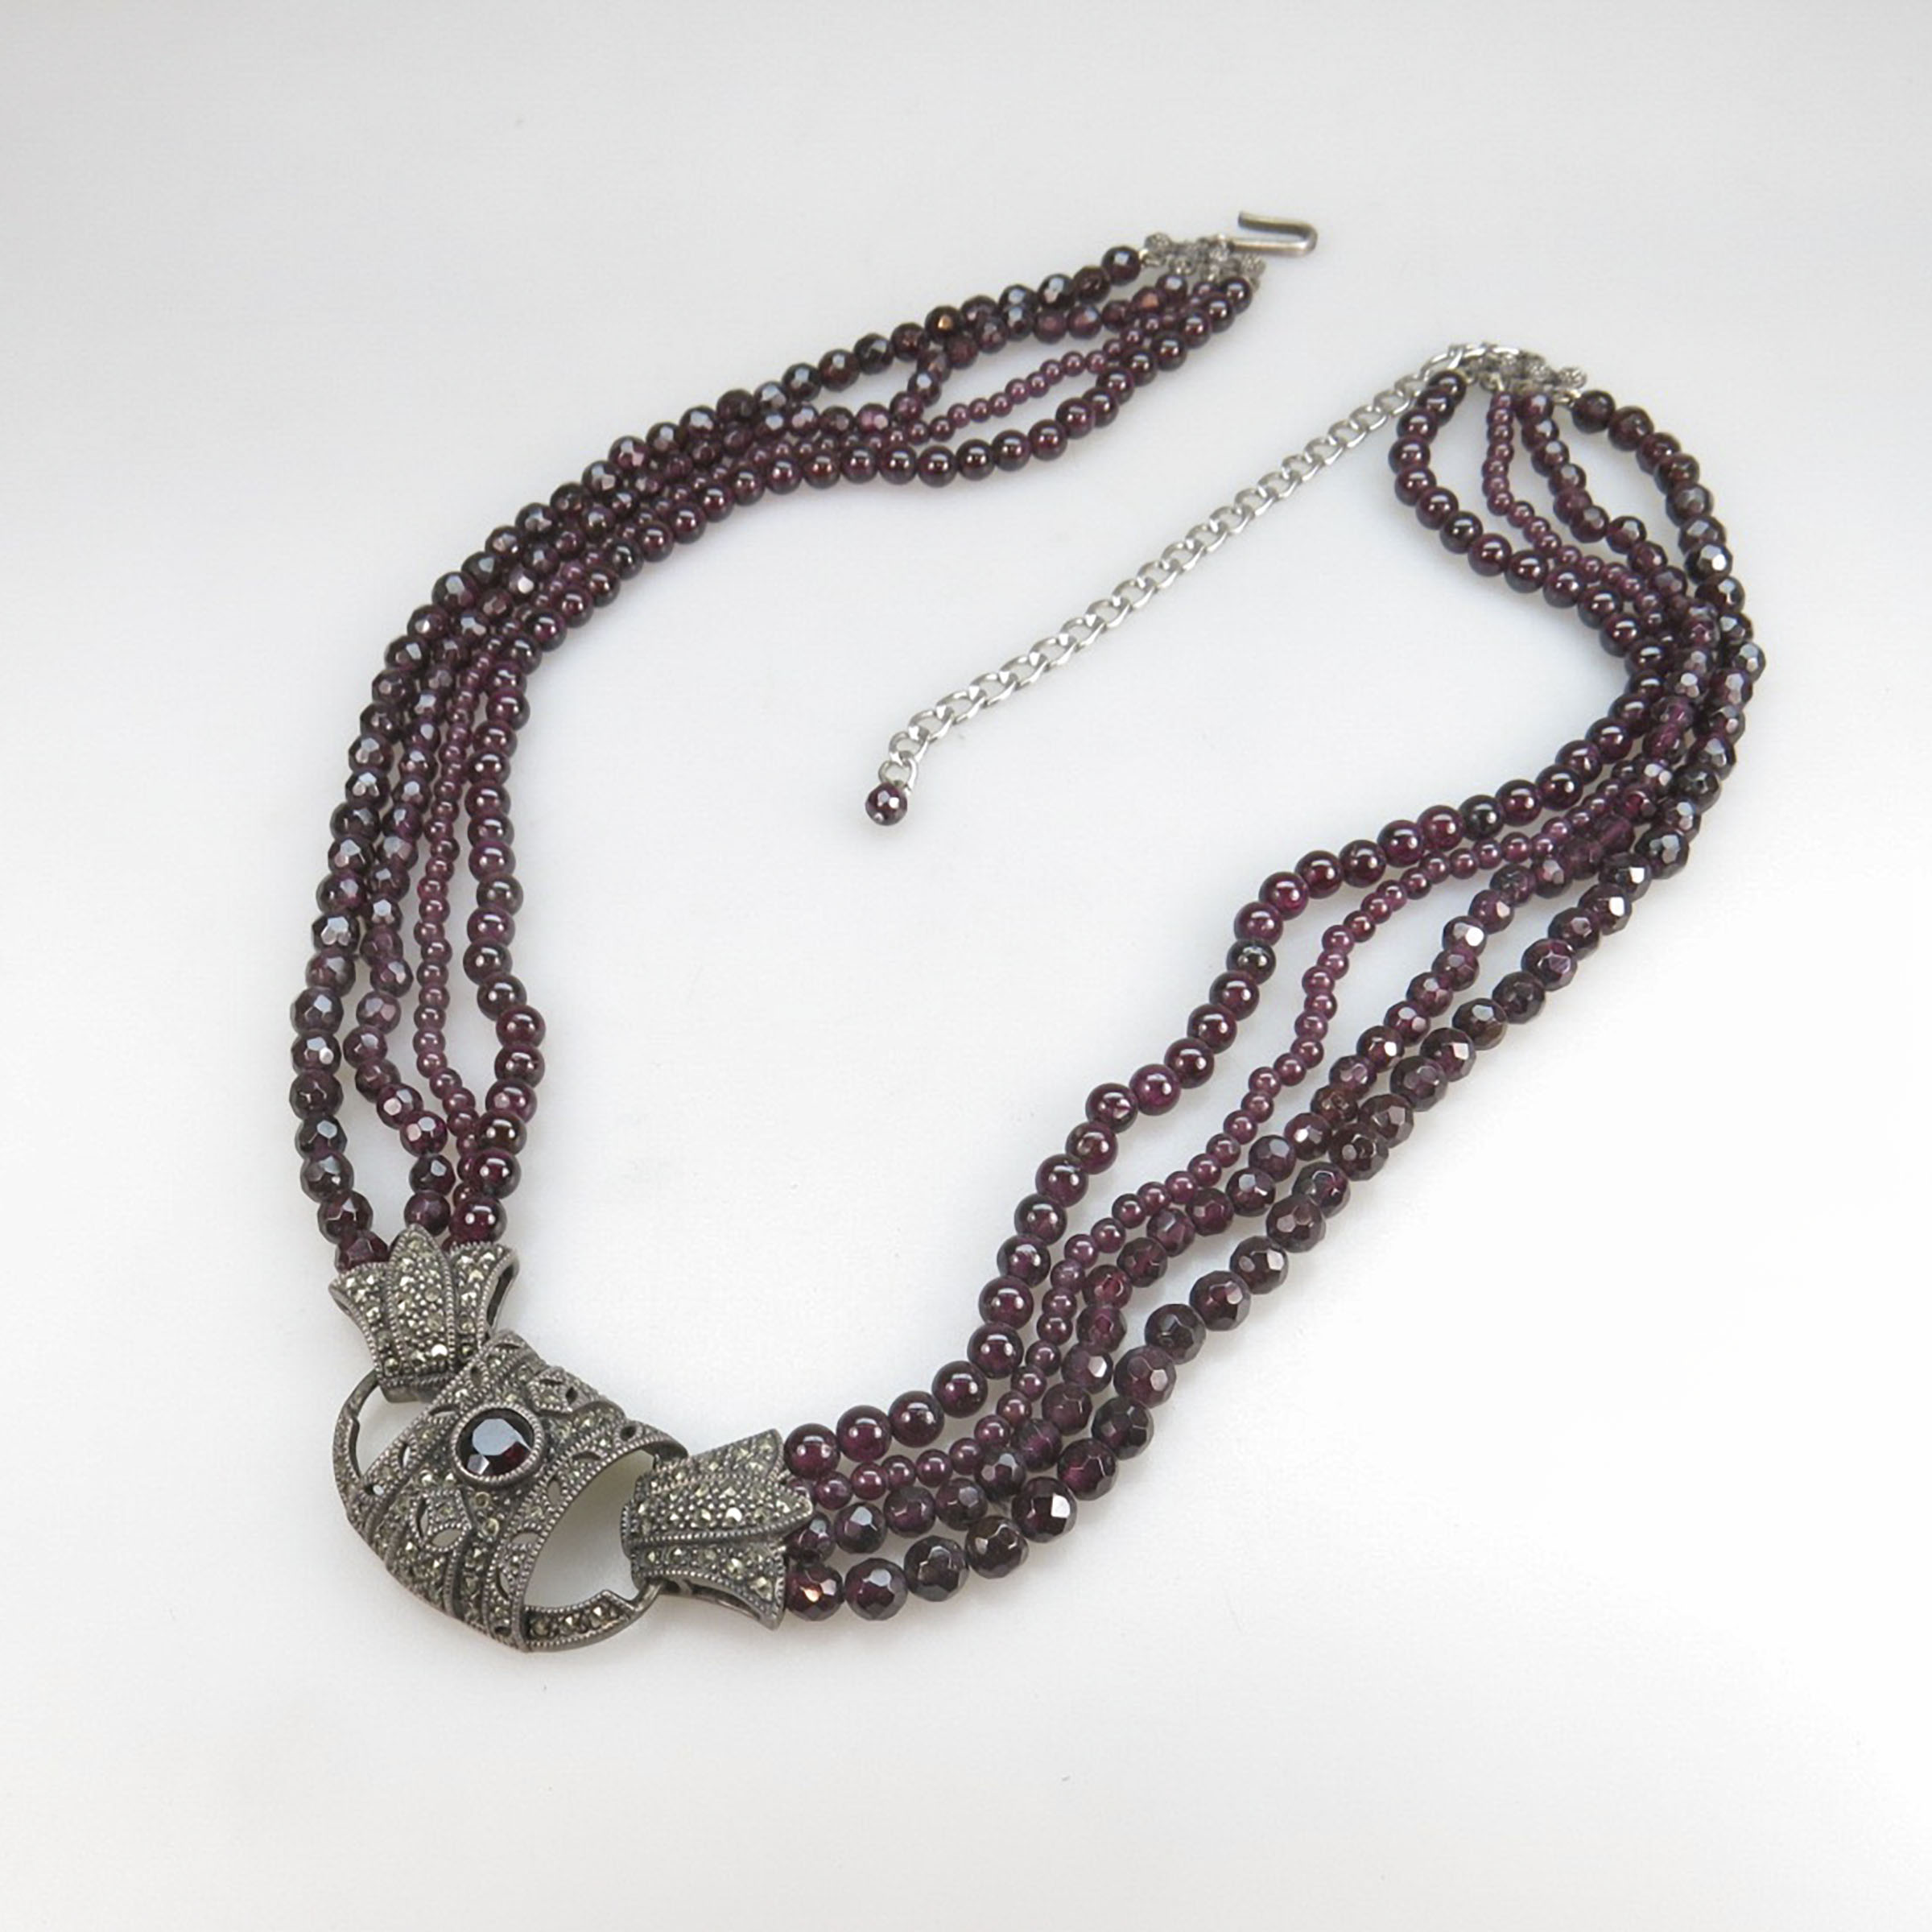 4 Strand Faceted Garnet Bead Necklace 